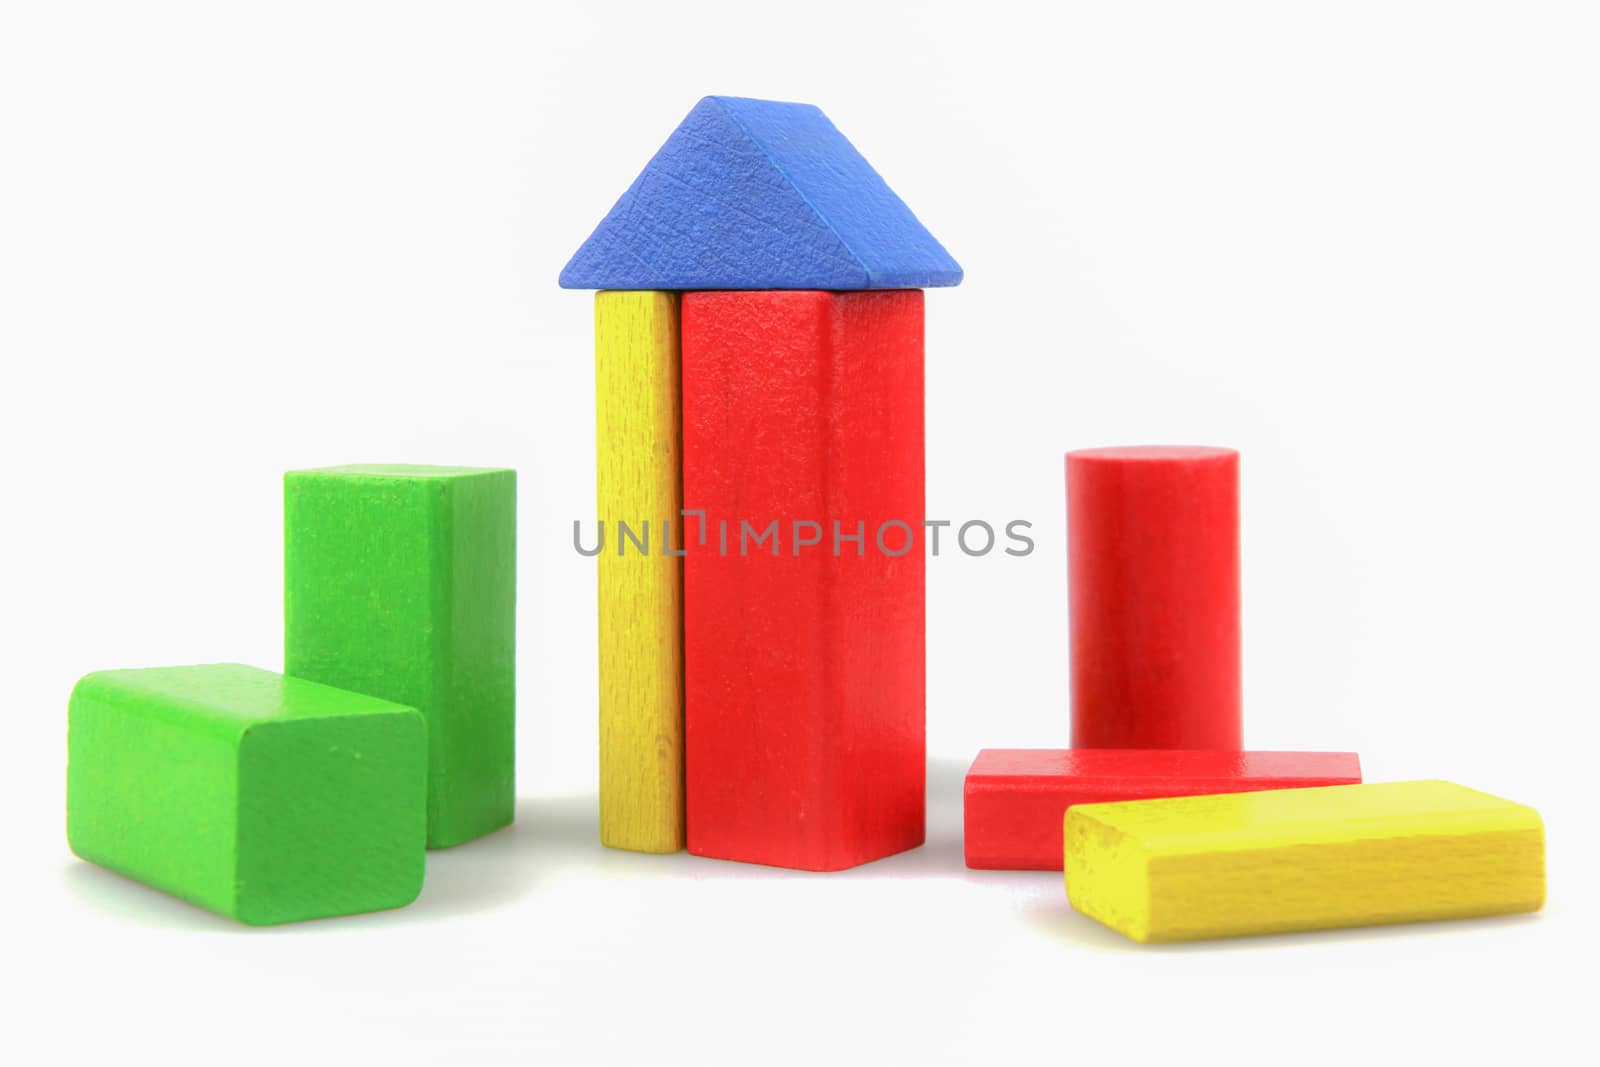 Colorful Wooden Building Blocks Toys Isolated On White by nenovbrothers